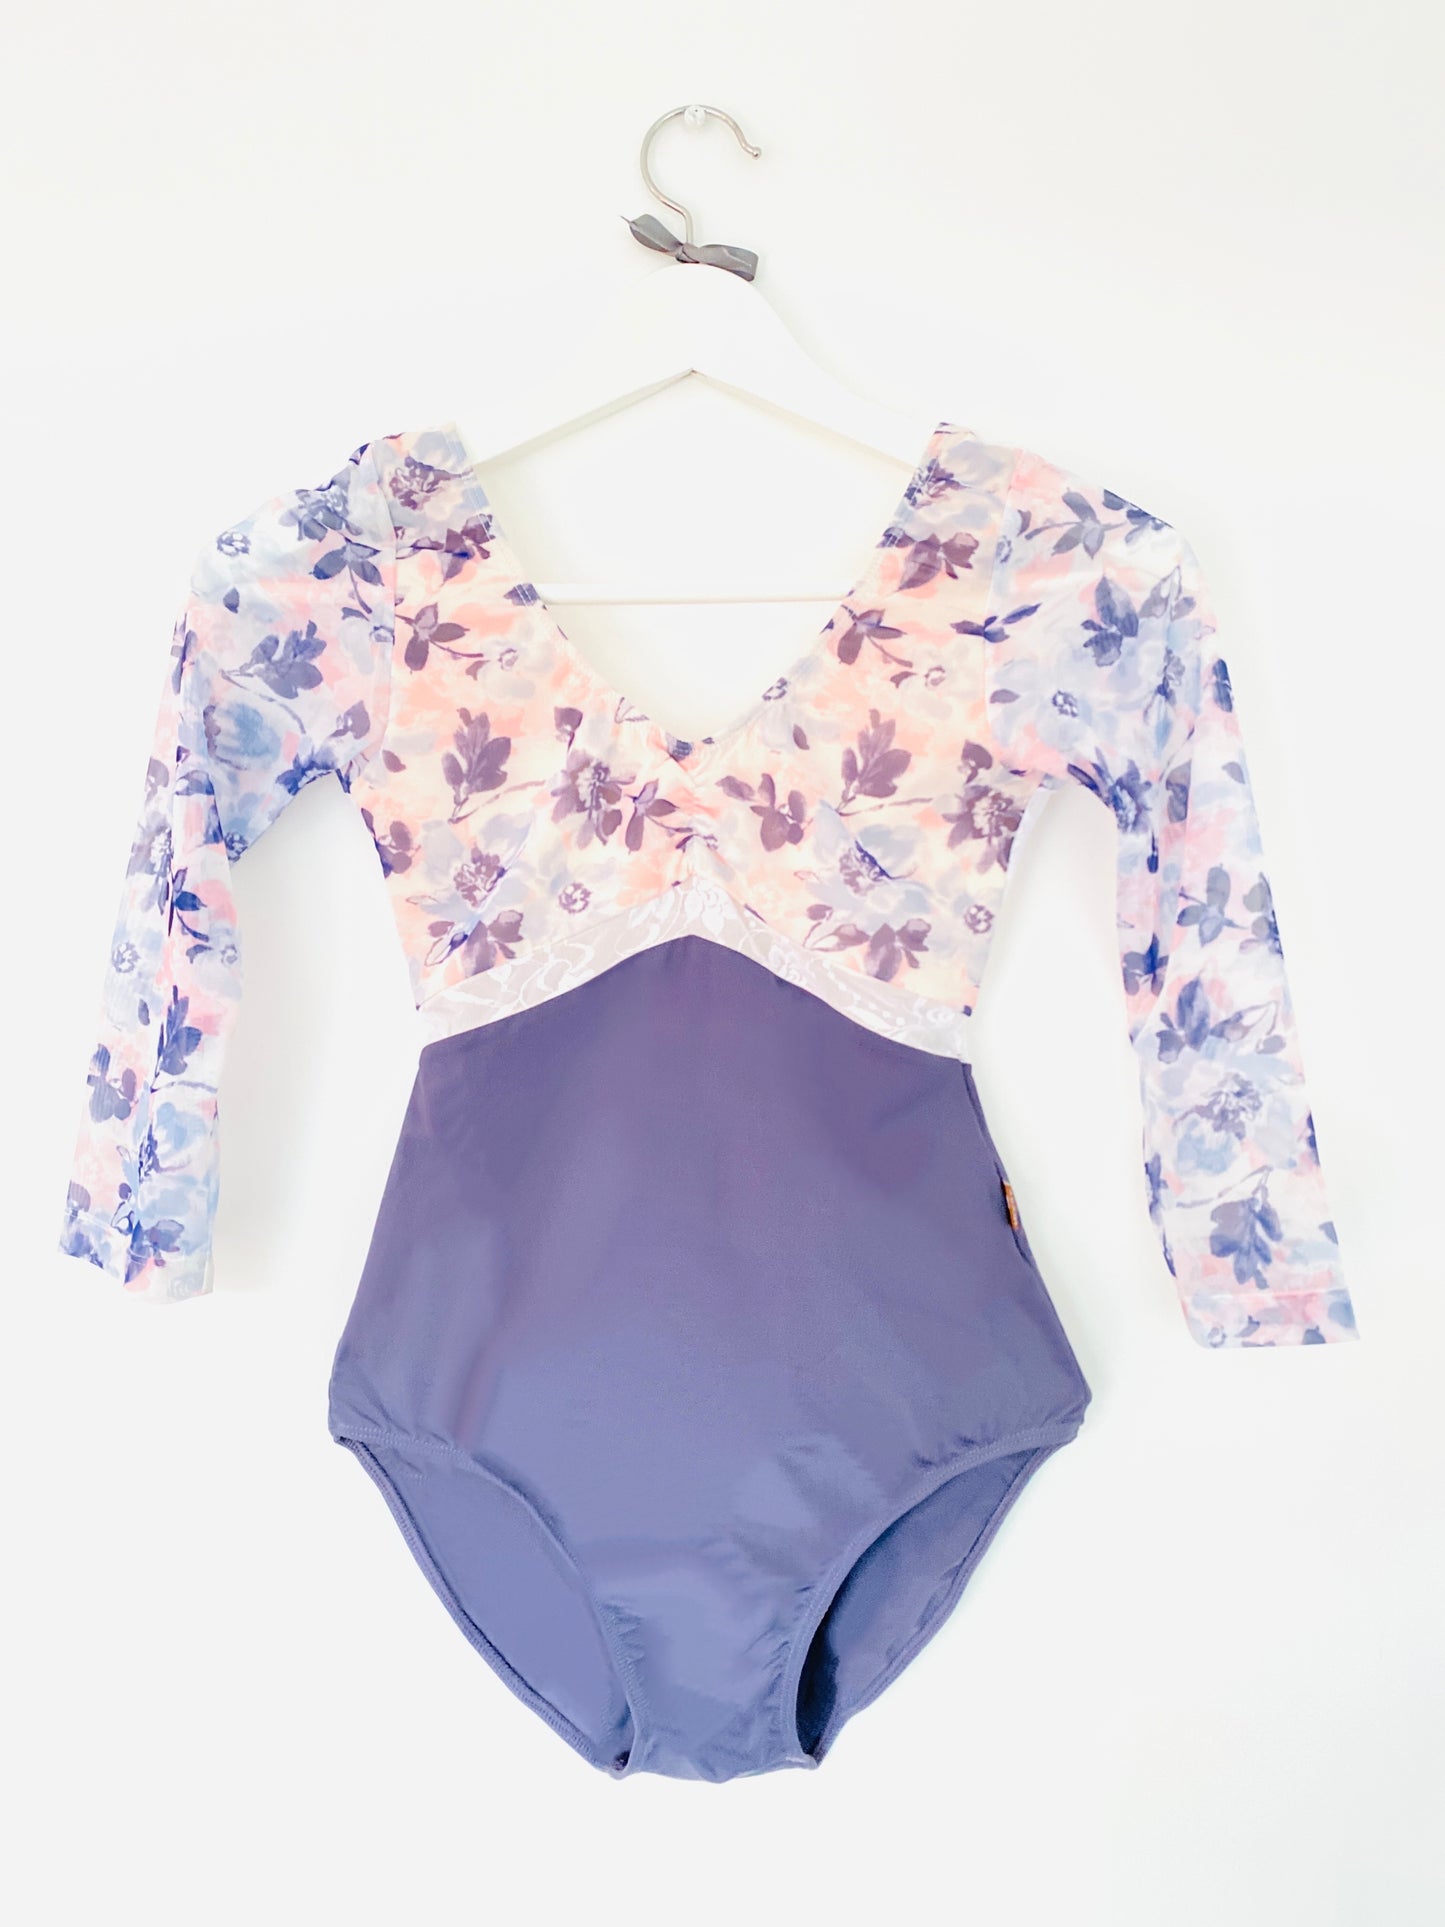 Floral plum leotard with a deep lace back and long sleeves from the Collective Dancewear